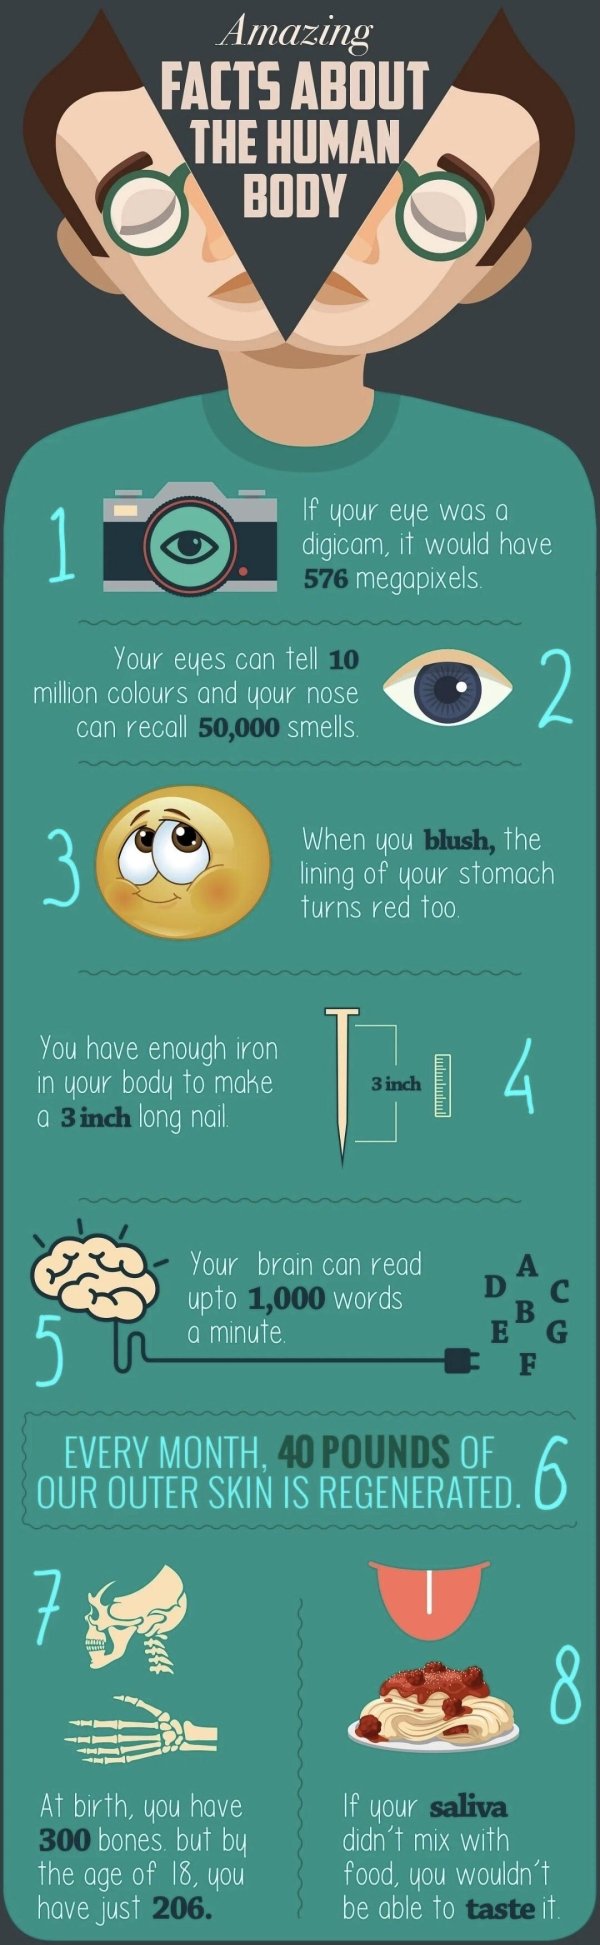 poster - Amazing Facts About The Human Body If your eye was a digicam, it would have 576 megapixels Your eyes can tell 10 million colours and your nose can recall 50,000 smells. 2 3 When you blush, the lining of your stomach turns red too. You have enough